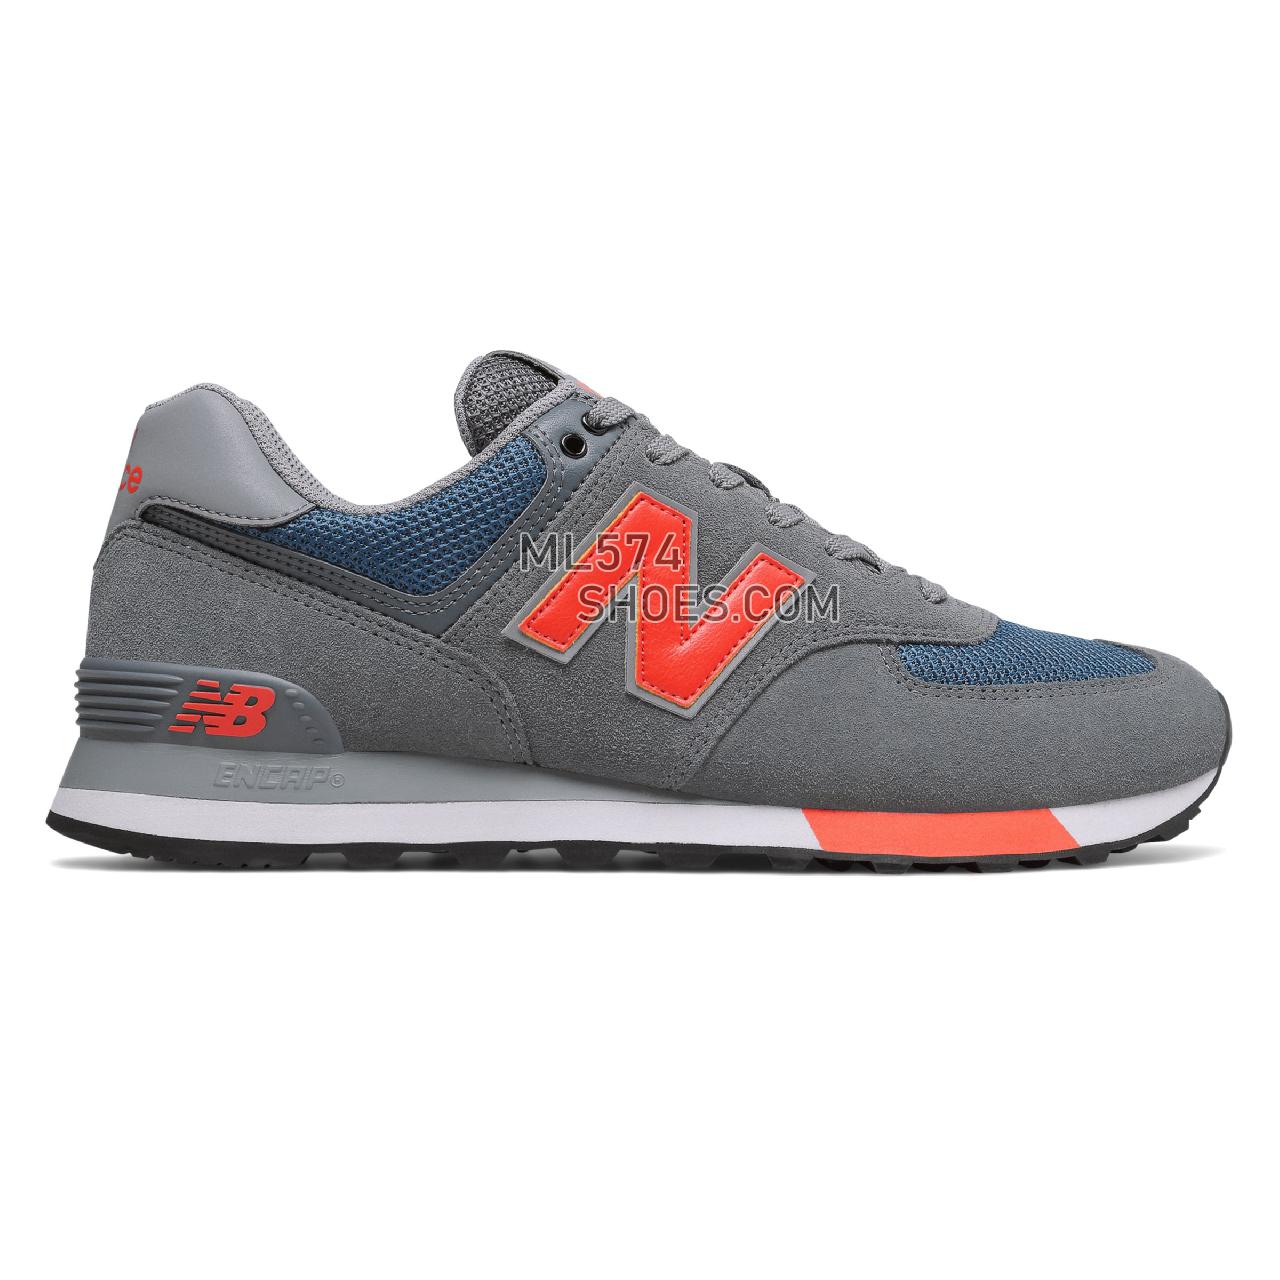 New Balance 574 - Men's Classic Sneakers - Lead with Dark Blue and Coral Glow - ML574NFO